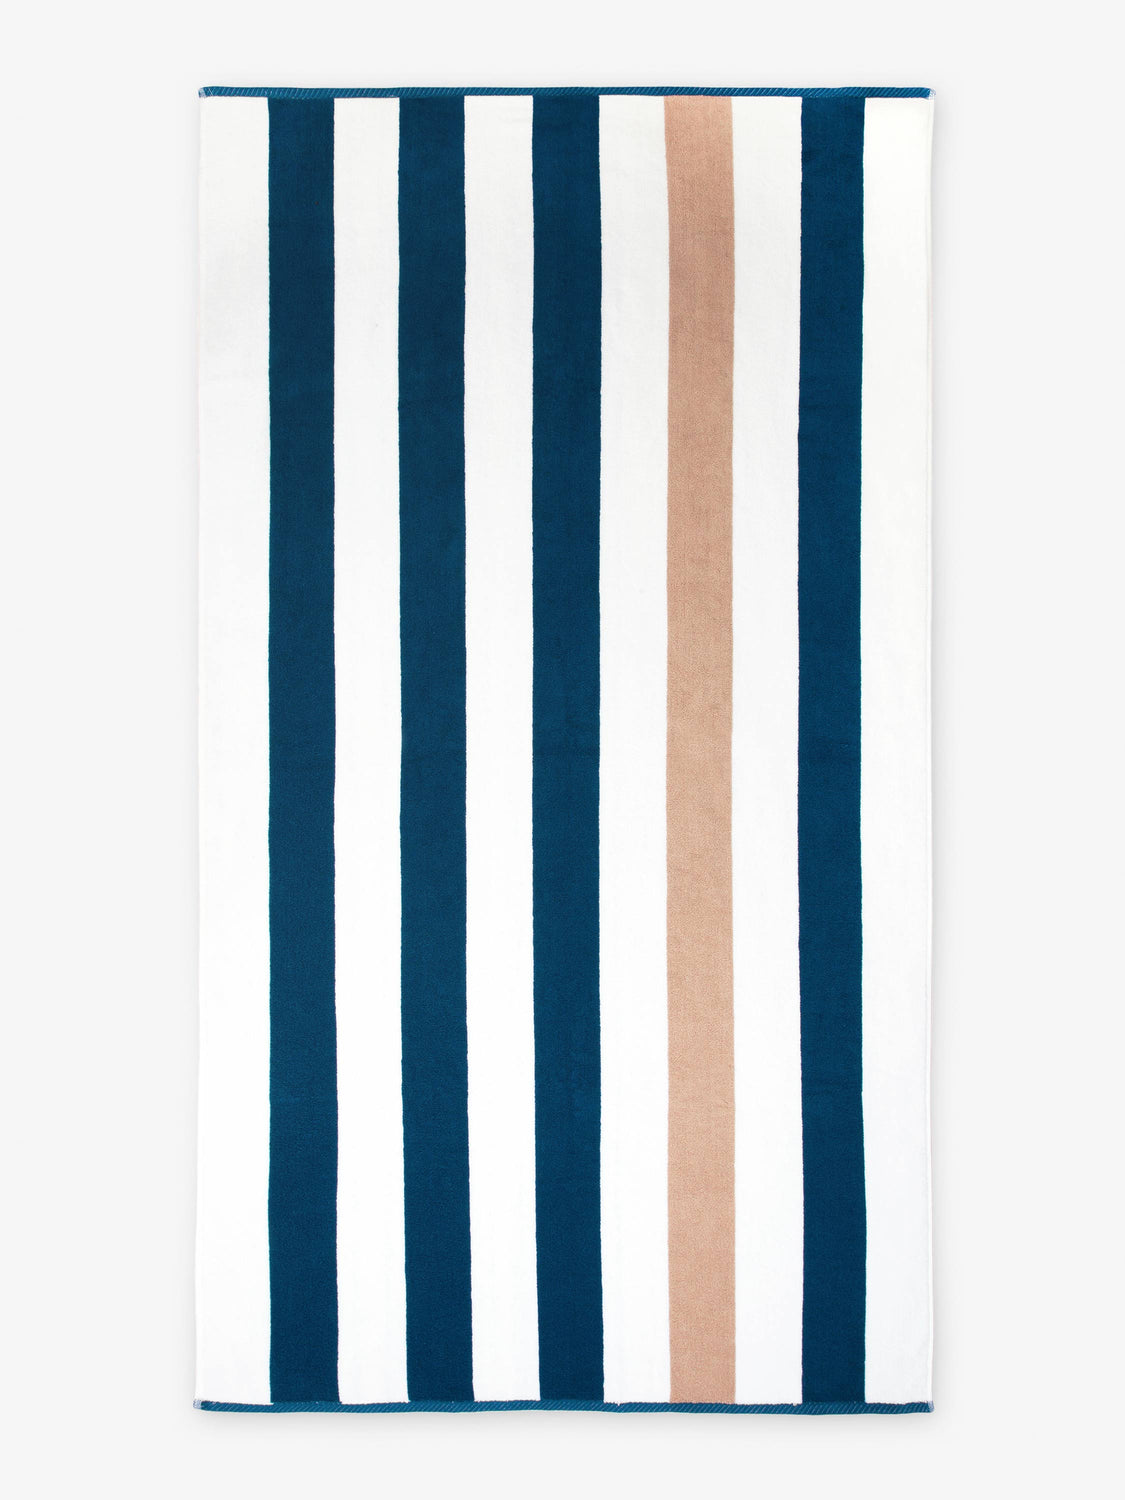 An oversized, blue, brown, and white striped cabana beach towel laid out.